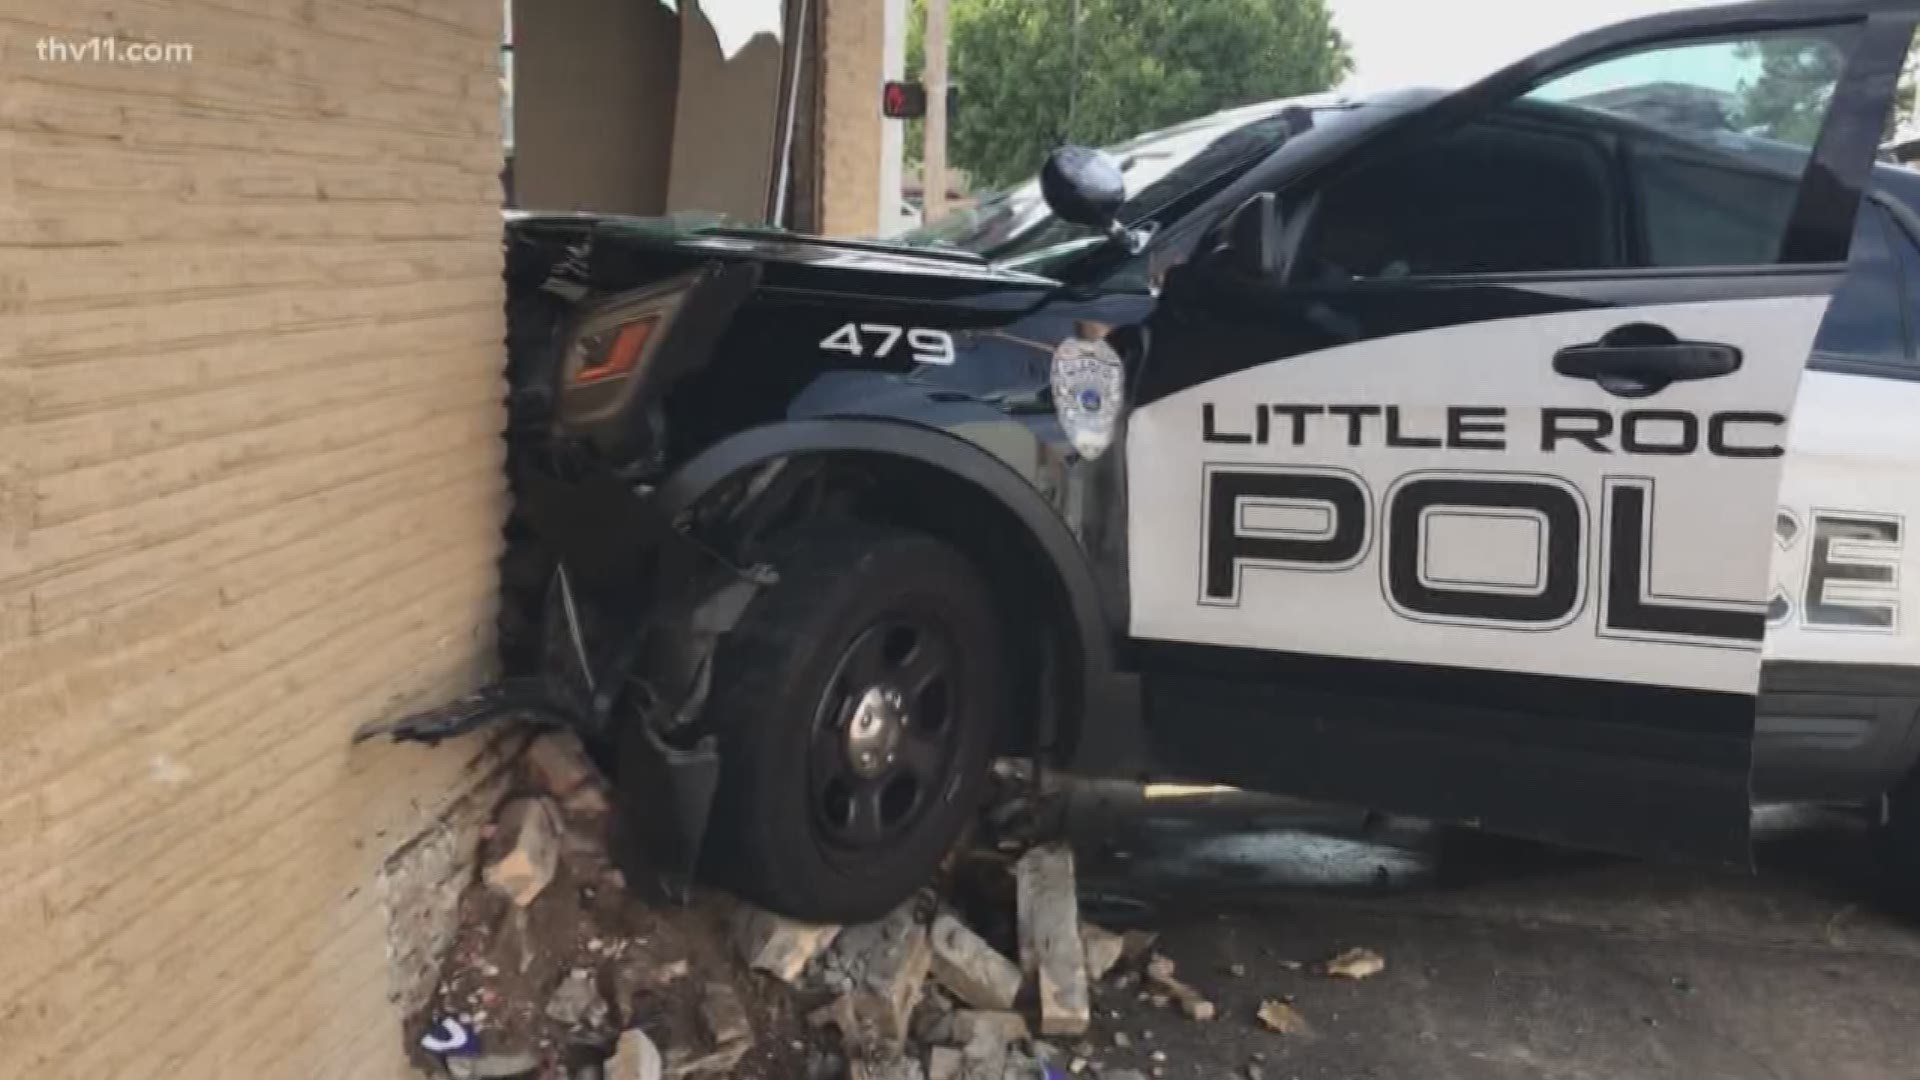 A police vehicle crashed into a building in downtown Little Rock.